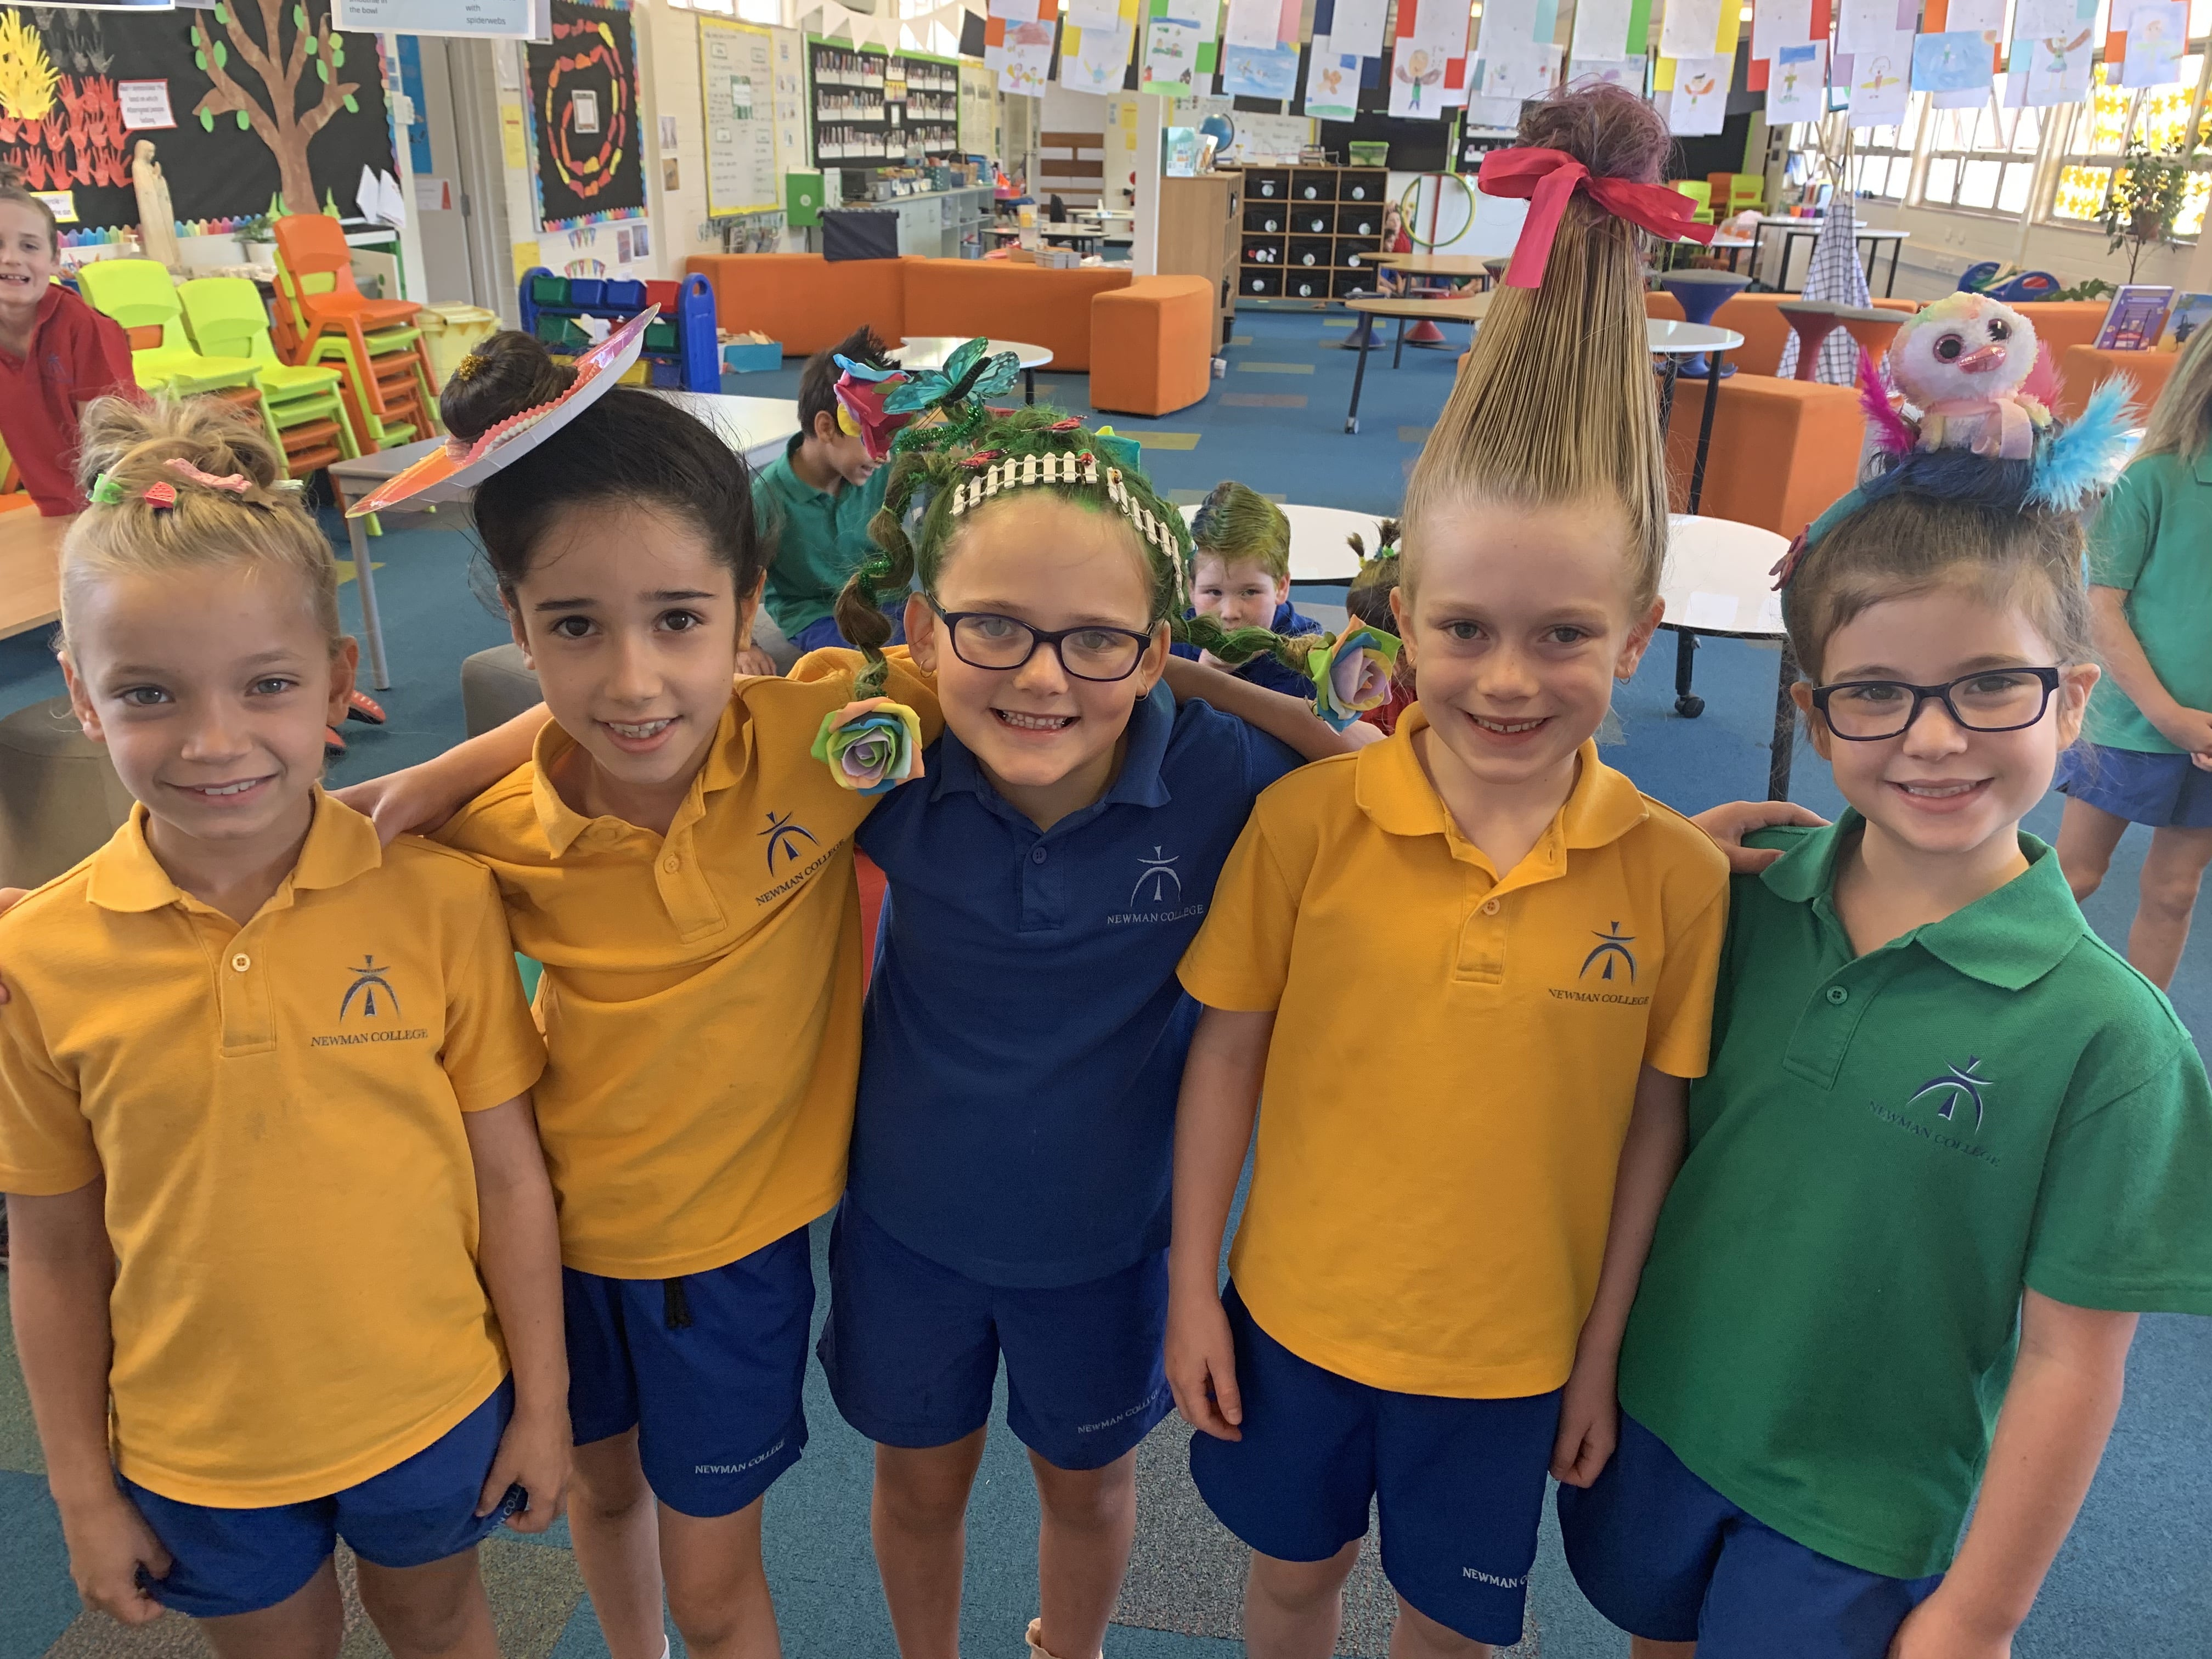 Newman News Term 4 Week 6: From the Ministry, Outreach and Advocacy Team